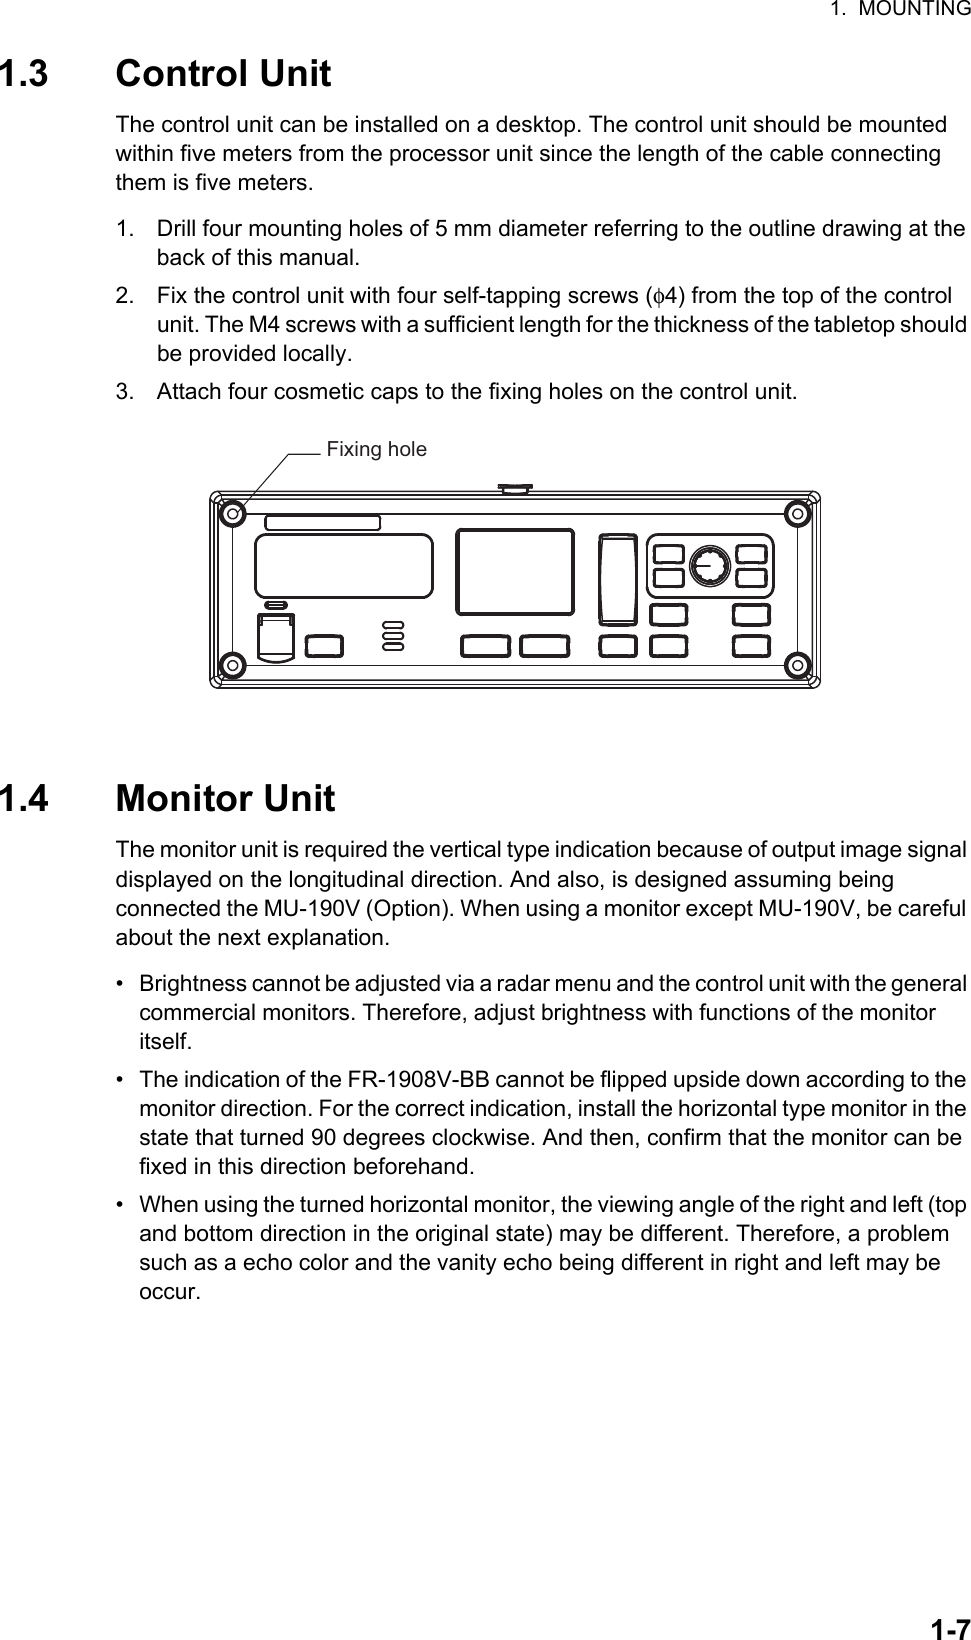 1.  MOUNTING1-71.3 Control UnitThe control unit can be installed on a desktop. The control unit should be mounted within five meters from the processor unit since the length of the cable connecting them is five meters.1. Drill four mounting holes of 5 mm diameter referring to the outline drawing at the back of this manual.2. Fix the control unit with four self-tapping screws (φ4) from the top of the control unit. The M4 screws with a sufficient length for the thickness of the tabletop should be provided locally.3. Attach four cosmetic caps to the fixing holes on the control unit. 1.4 Monitor UnitThe monitor unit is required the vertical type indication because of output image signal displayed on the longitudinal direction. And also, is designed assuming being            connected the MU-190V (Option). When using a monitor except MU-190V, be careful about the next explanation.•  Brightness cannot be adjusted via a radar menu and the control unit with the general commercial monitors. Therefore, adjust brightness with functions of the monitor      itself. •  The indication of the FR-1908V-BB cannot be flipped upside down according to the monitor direction. For the correct indication, install the horizontal type monitor in the state that turned 90 degrees clockwise. And then, confirm that the monitor can be fixed in this direction beforehand.•  When using the turned horizontal monitor, the viewing angle of the right and left (top and bottom direction in the original state) may be different. Therefore, a problem such as a echo color and the vanity echo being different in right and left may be     occur. Fixing hole